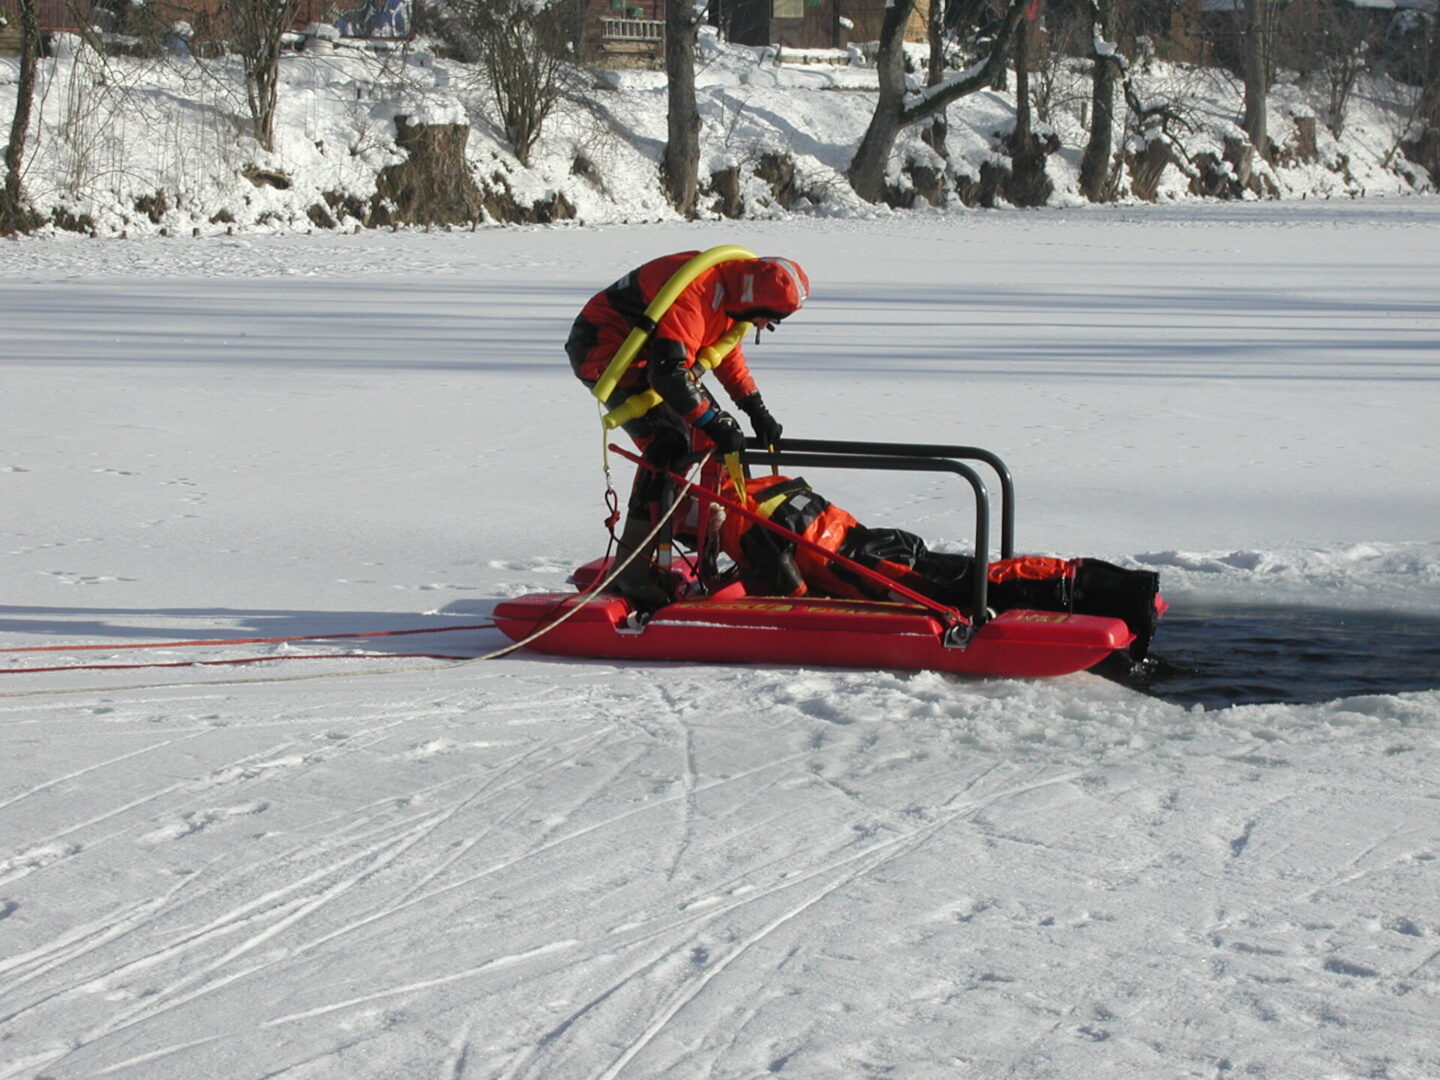 A complete rescue gear with a boat